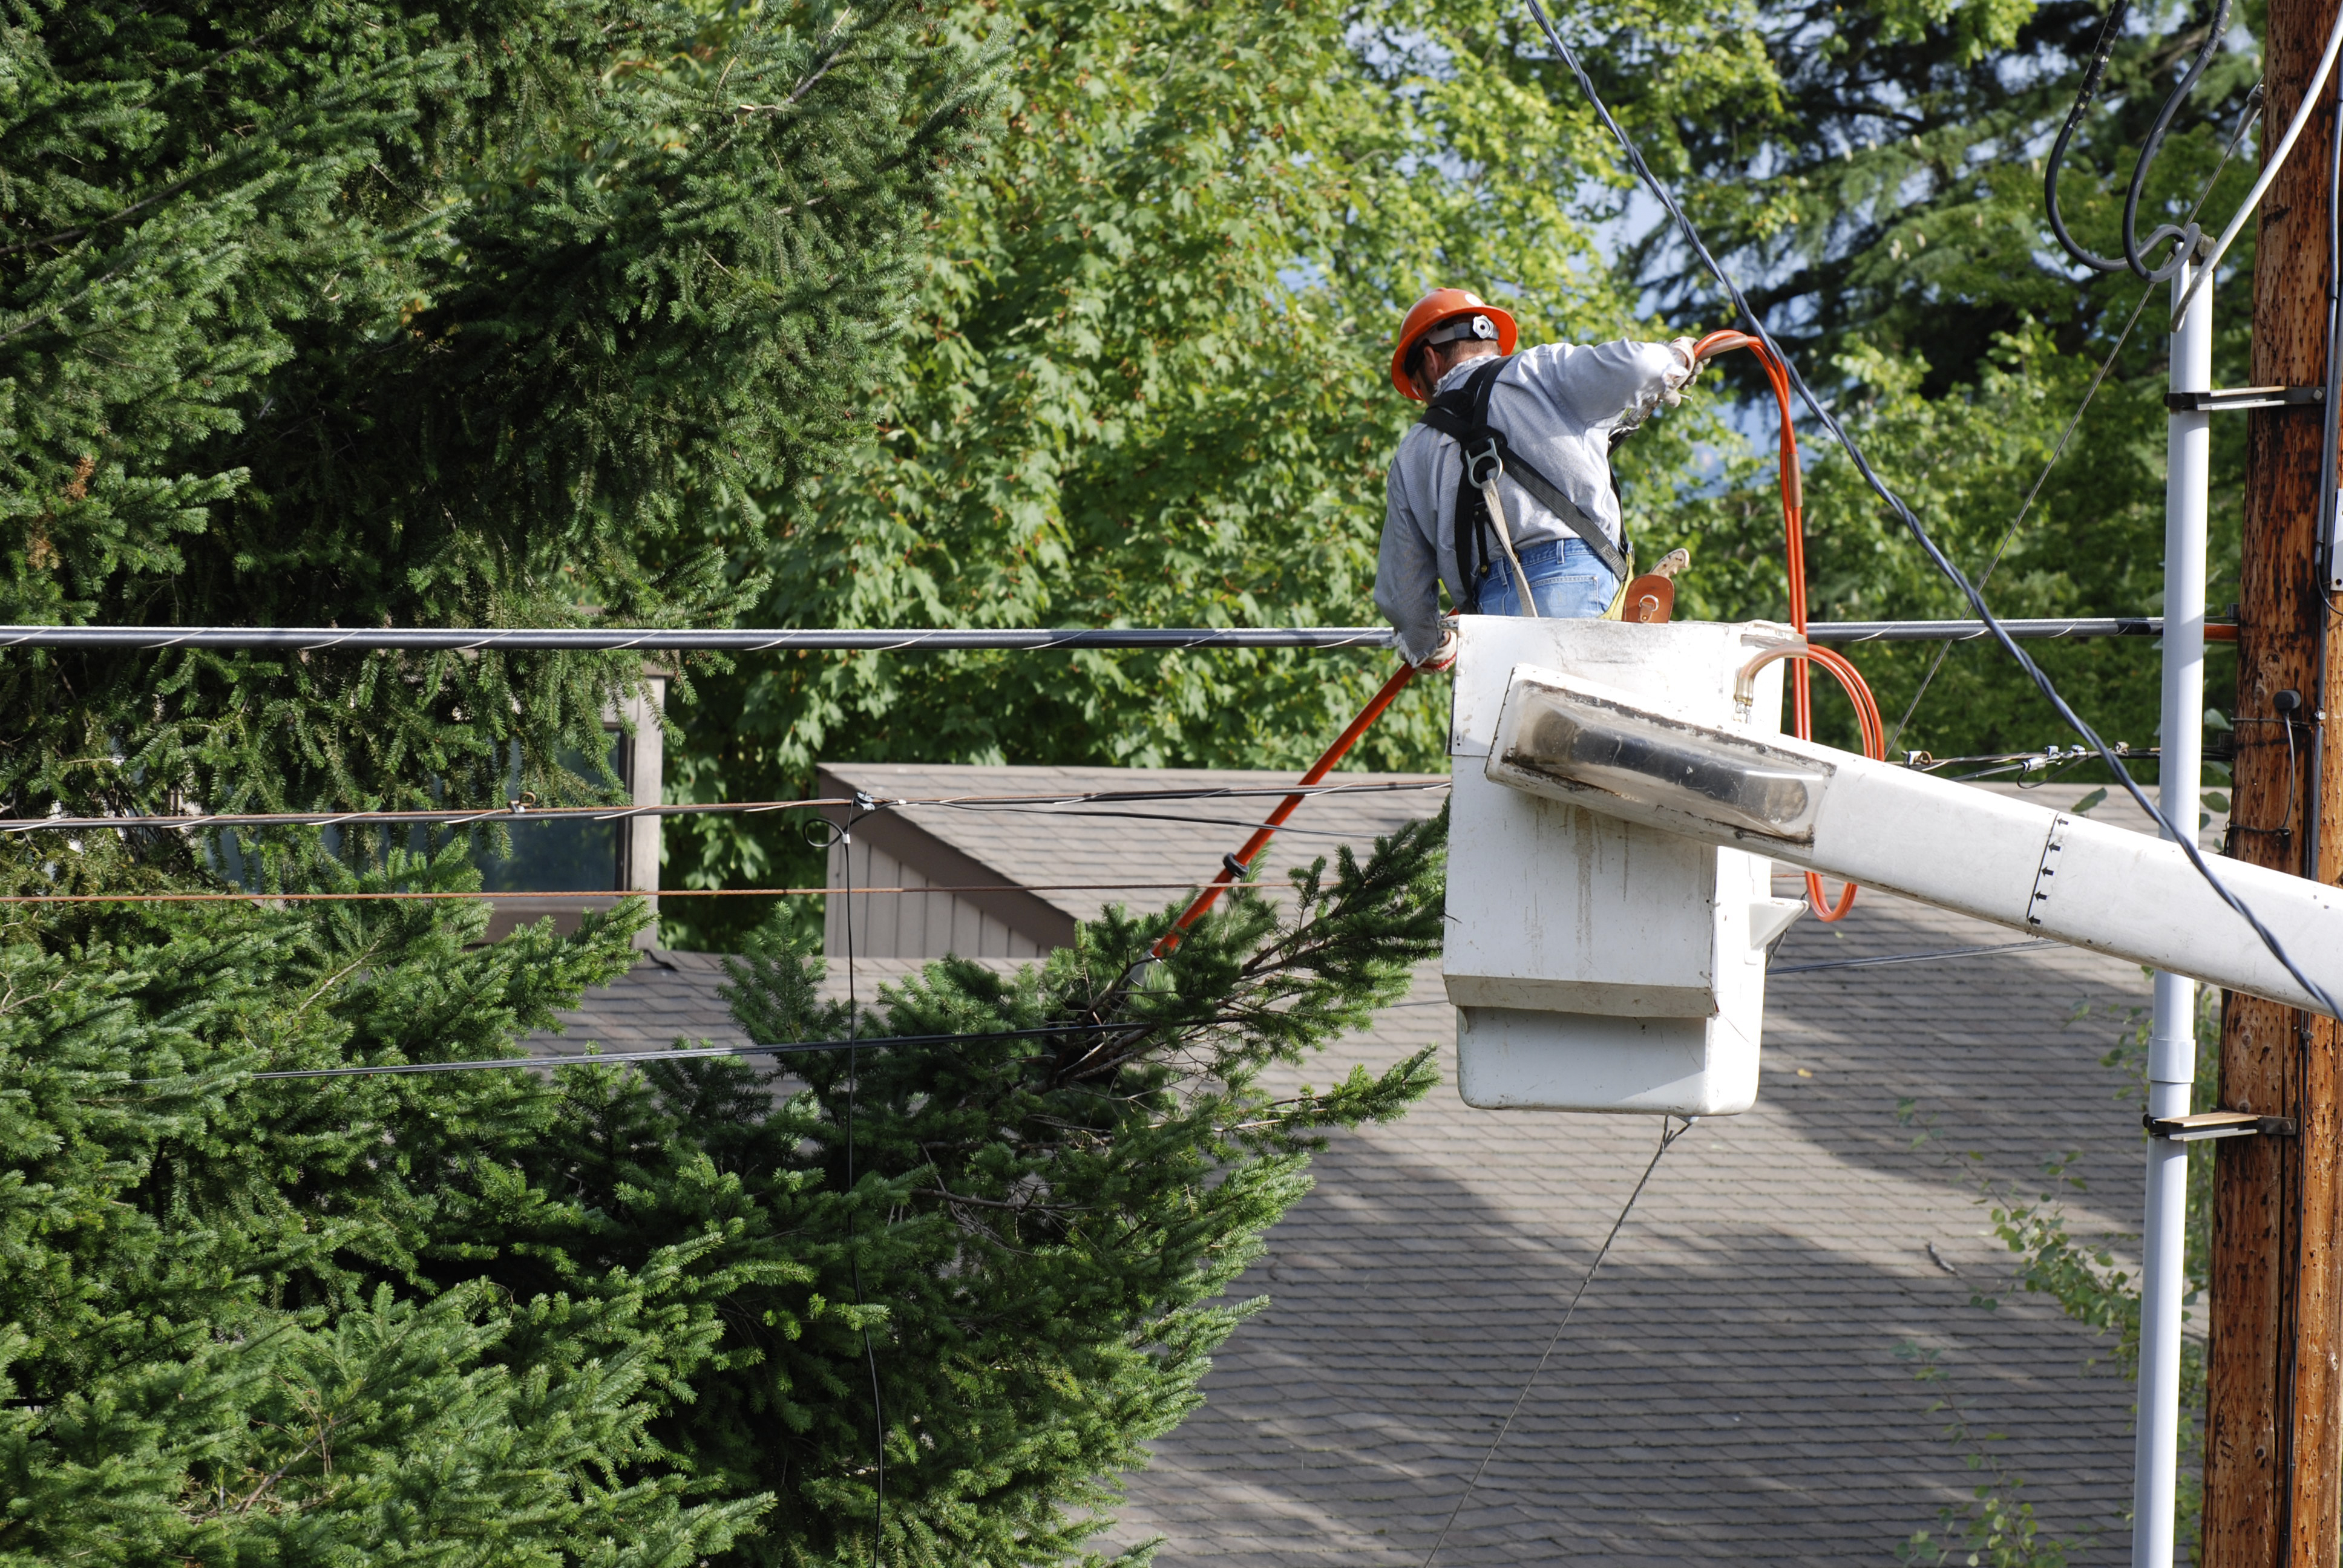 A man in a cherrypicker with an orange power saw, trimming evergreen branches